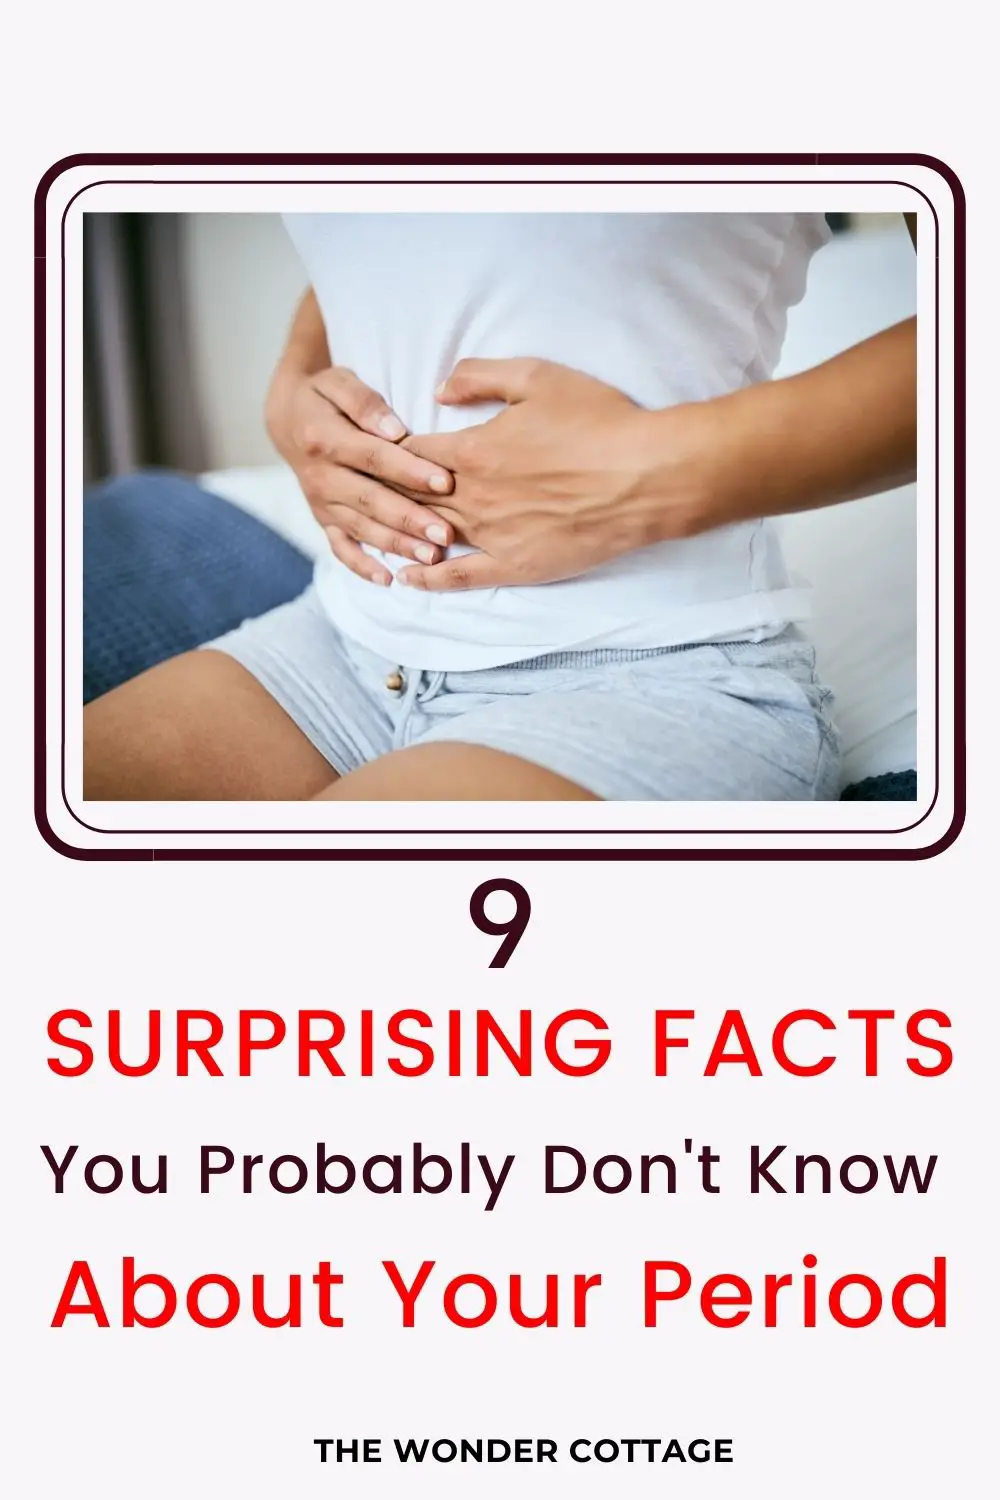 9 surprising facts you probably didn't know about your period